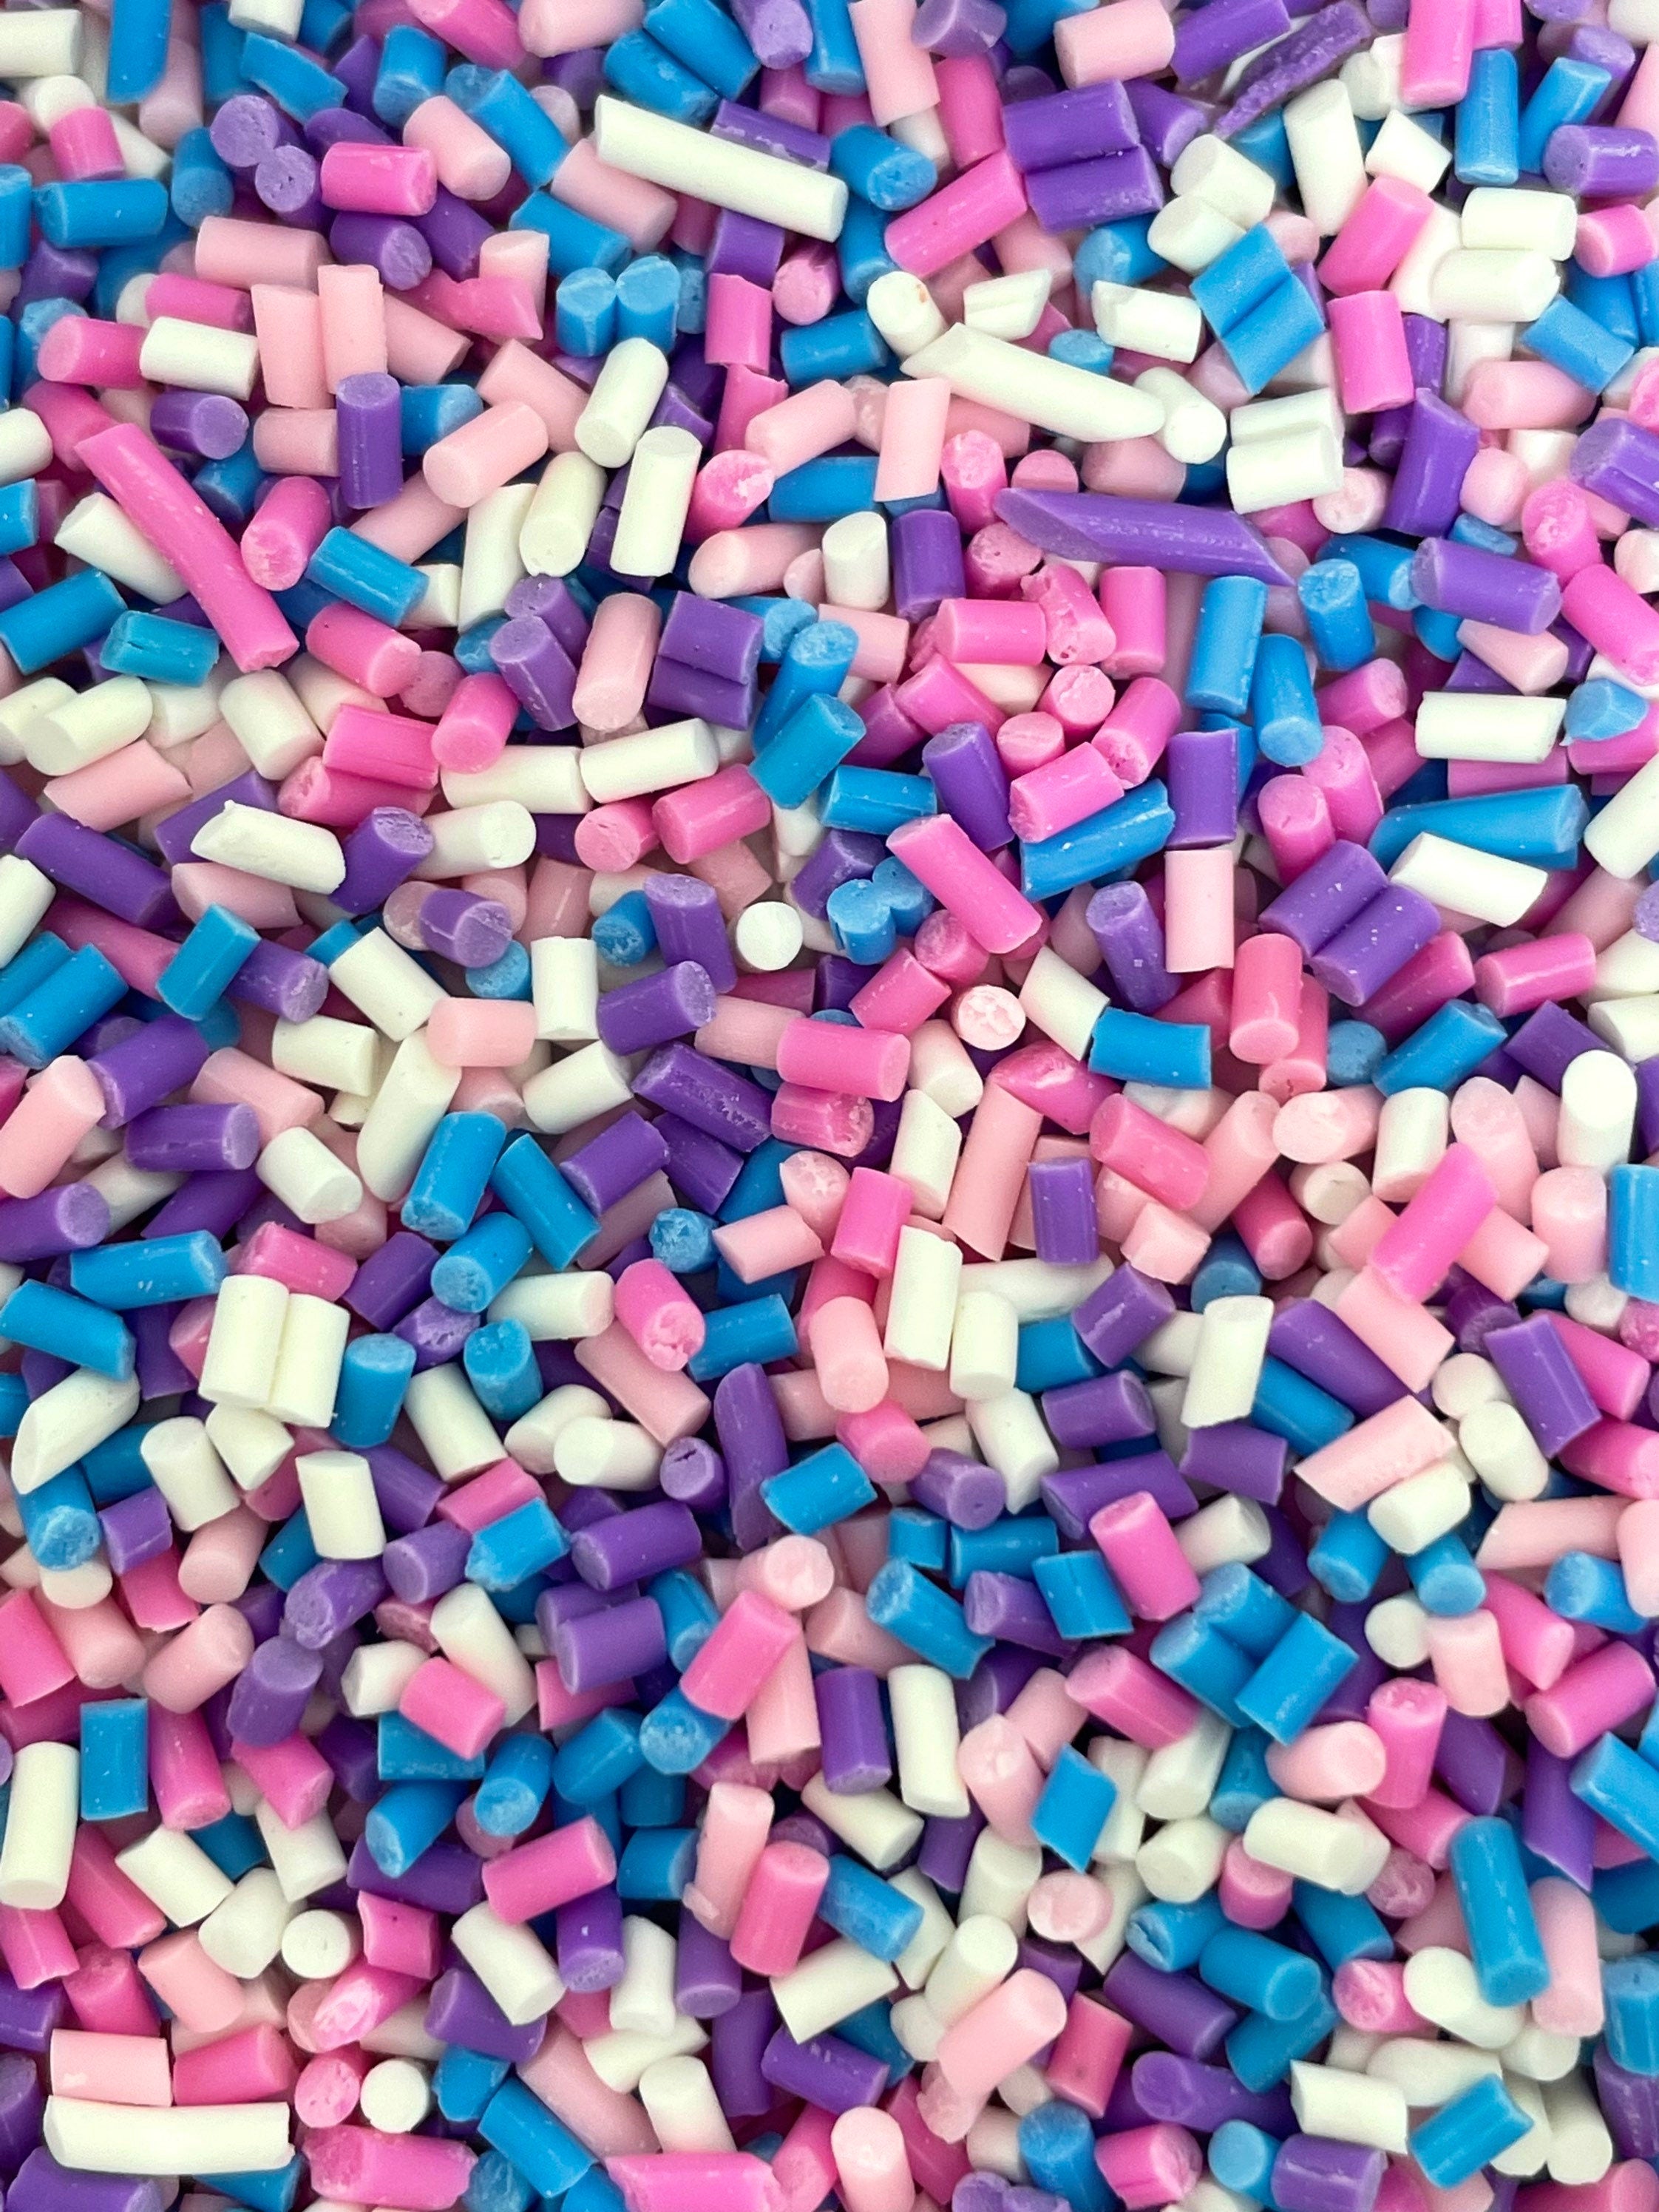 Fake Sprinkles Pastel Mix, Slime Add-Ins, Fake Cupcake Decorations, Polymer Clay Confetti Sprinkles, Kawaii Mix